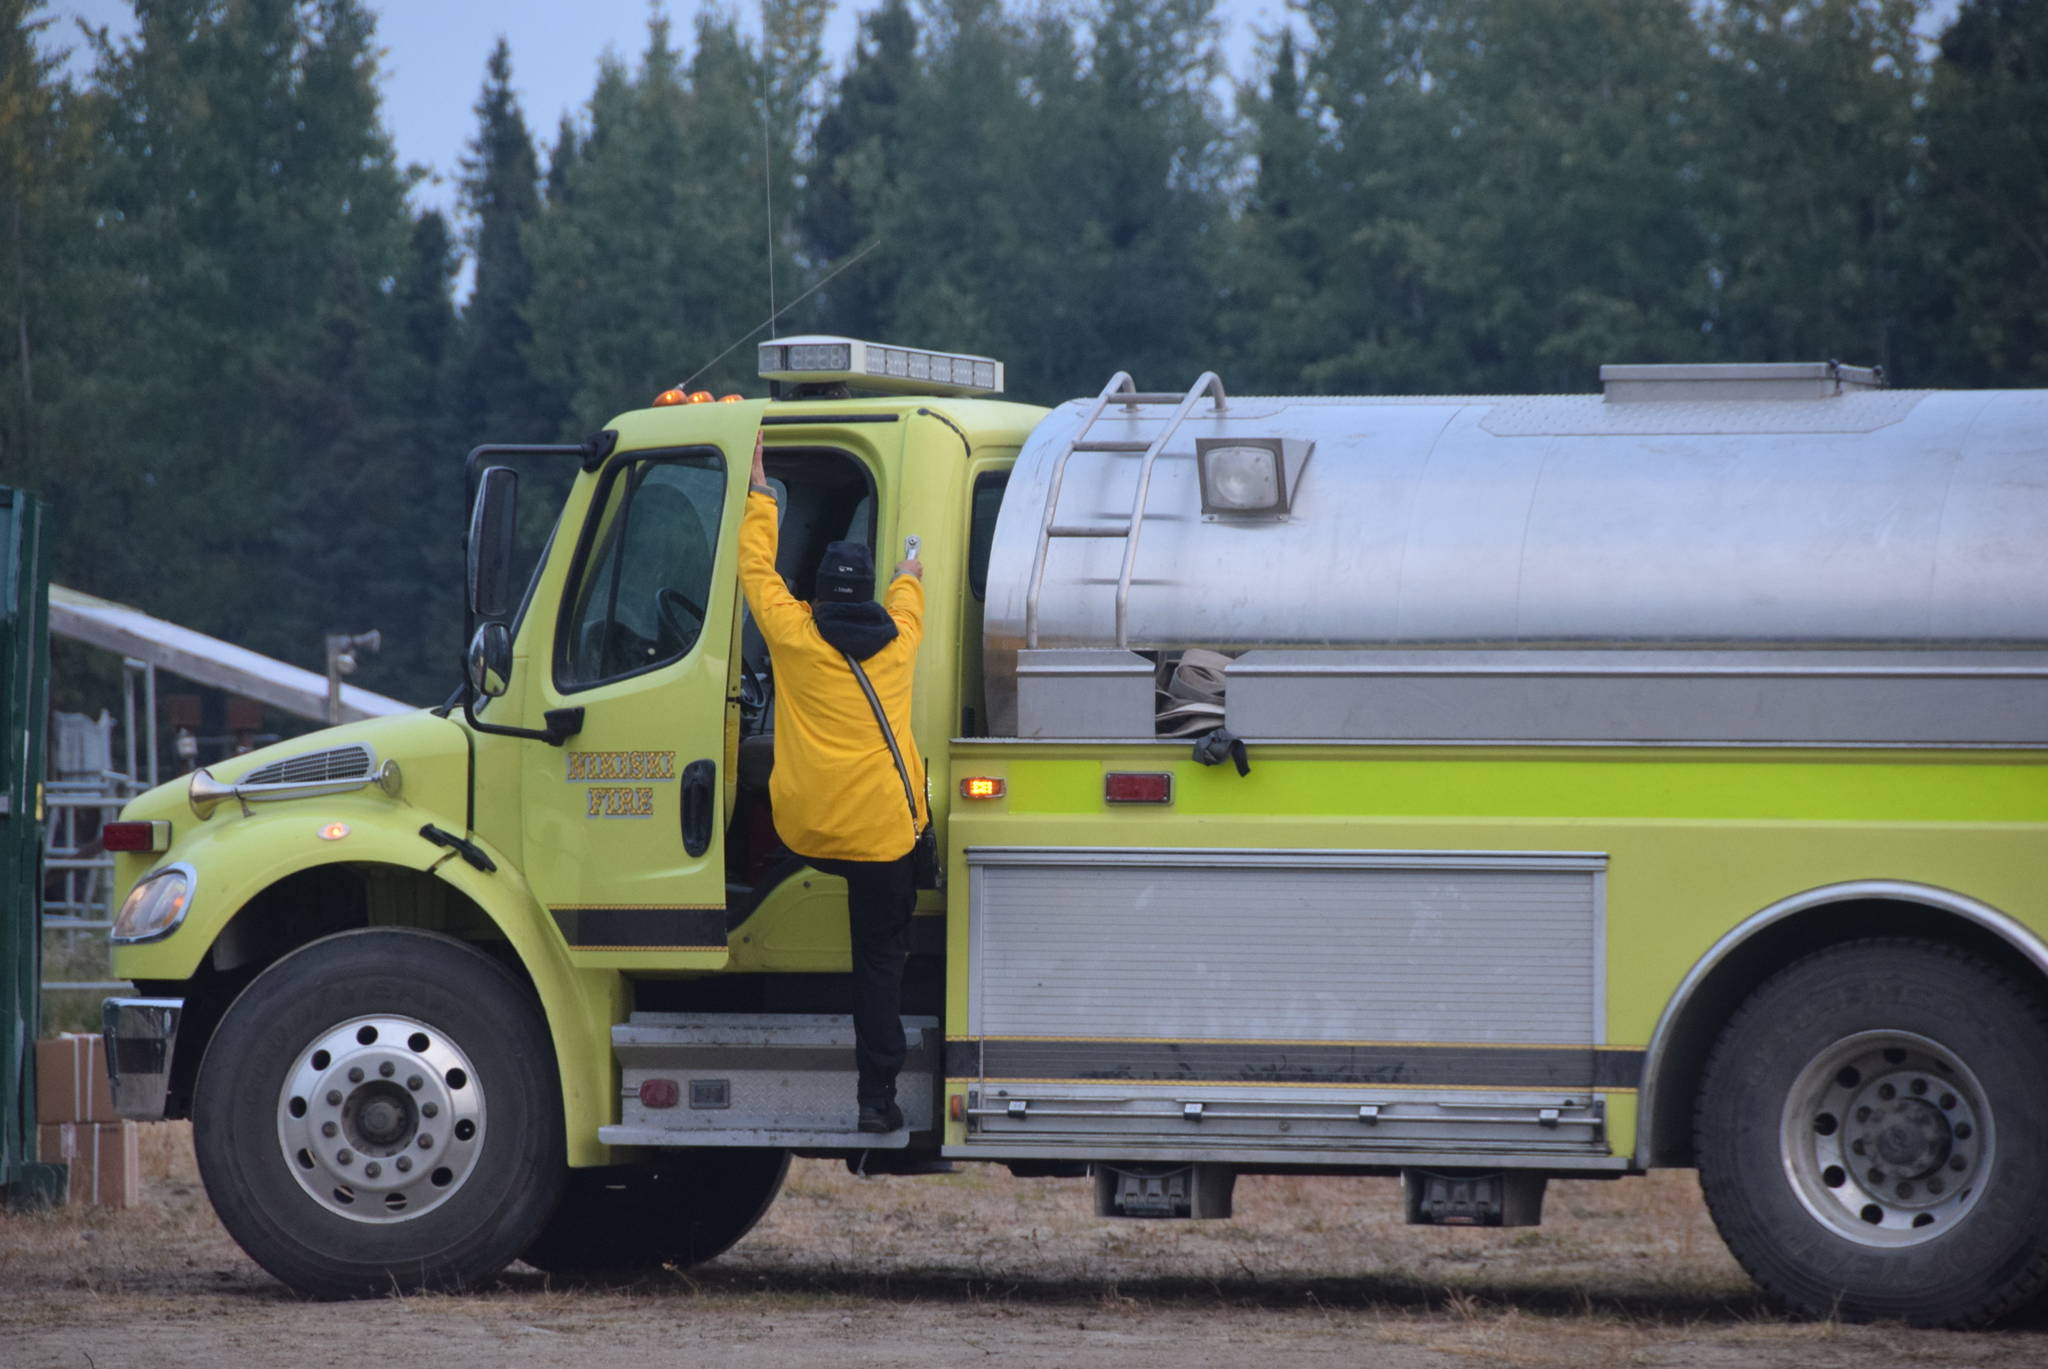 Firefighters load up a tanker from the Nikiski Fire Department at the Otter Creek Spike Camp 5 miles north of Sterling, Alaska on Aug. 30, 2019. (Photo by Brian Mazurek/Peninsula Clarion)